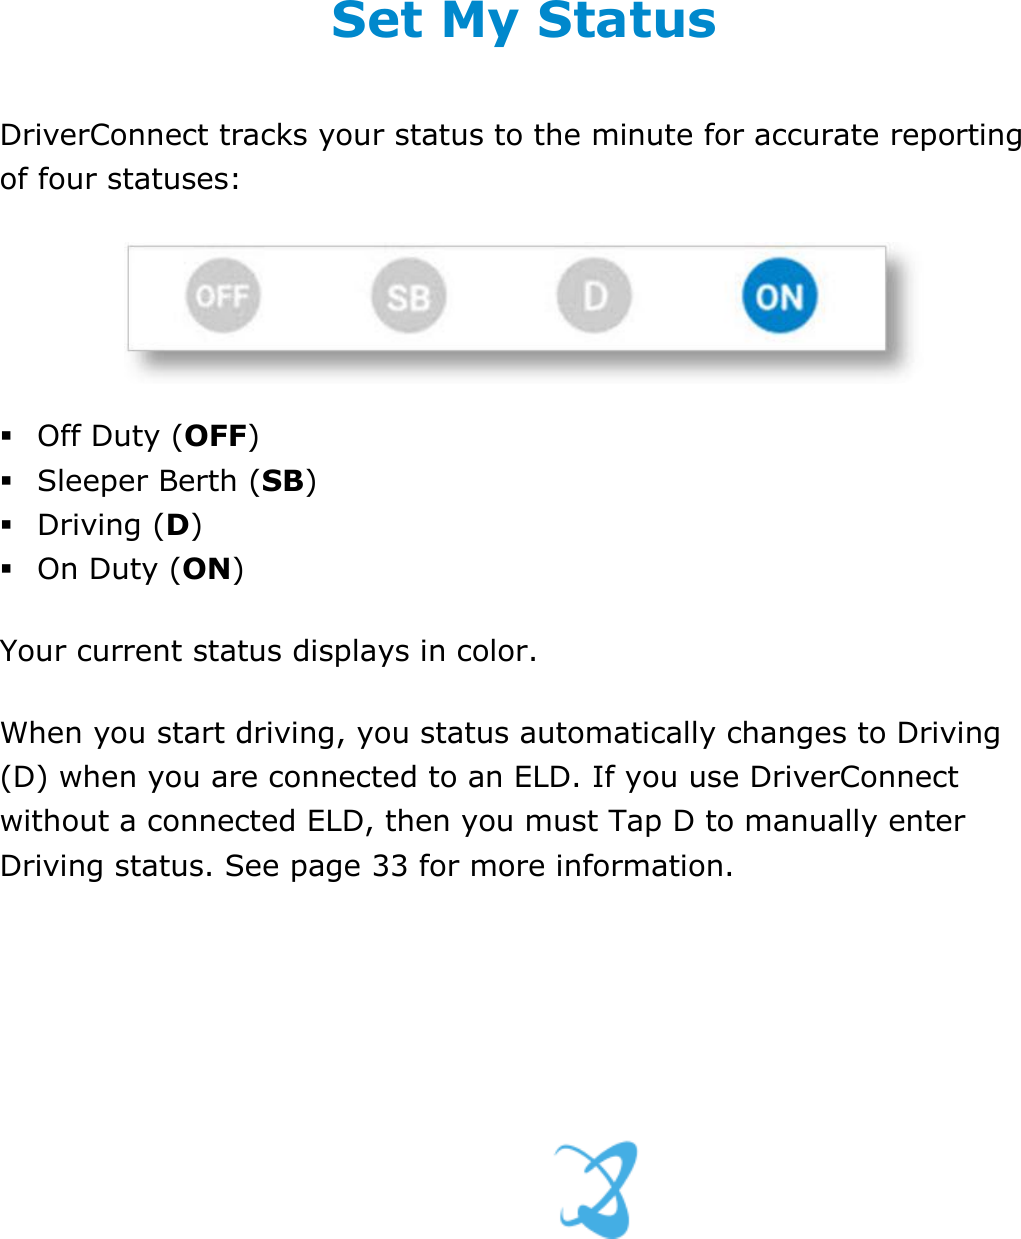 Set My Duty Status DriverConnect User Guide  29 © 2017, Rand McNally, Inc. Set My Status DriverConnect tracks your status to the minute for accurate reporting of four statuses:    Off Duty (OFF)  Sleeper Berth (SB)   Driving (D)  On Duty (ON) Your current status displays in color. When you start driving, you status automatically changes to Driving (D) when you are connected to an ELD. If you use DriverConnect without a connected ELD, then you must Tap D to manually enter Driving status. See page 33 for more information.   